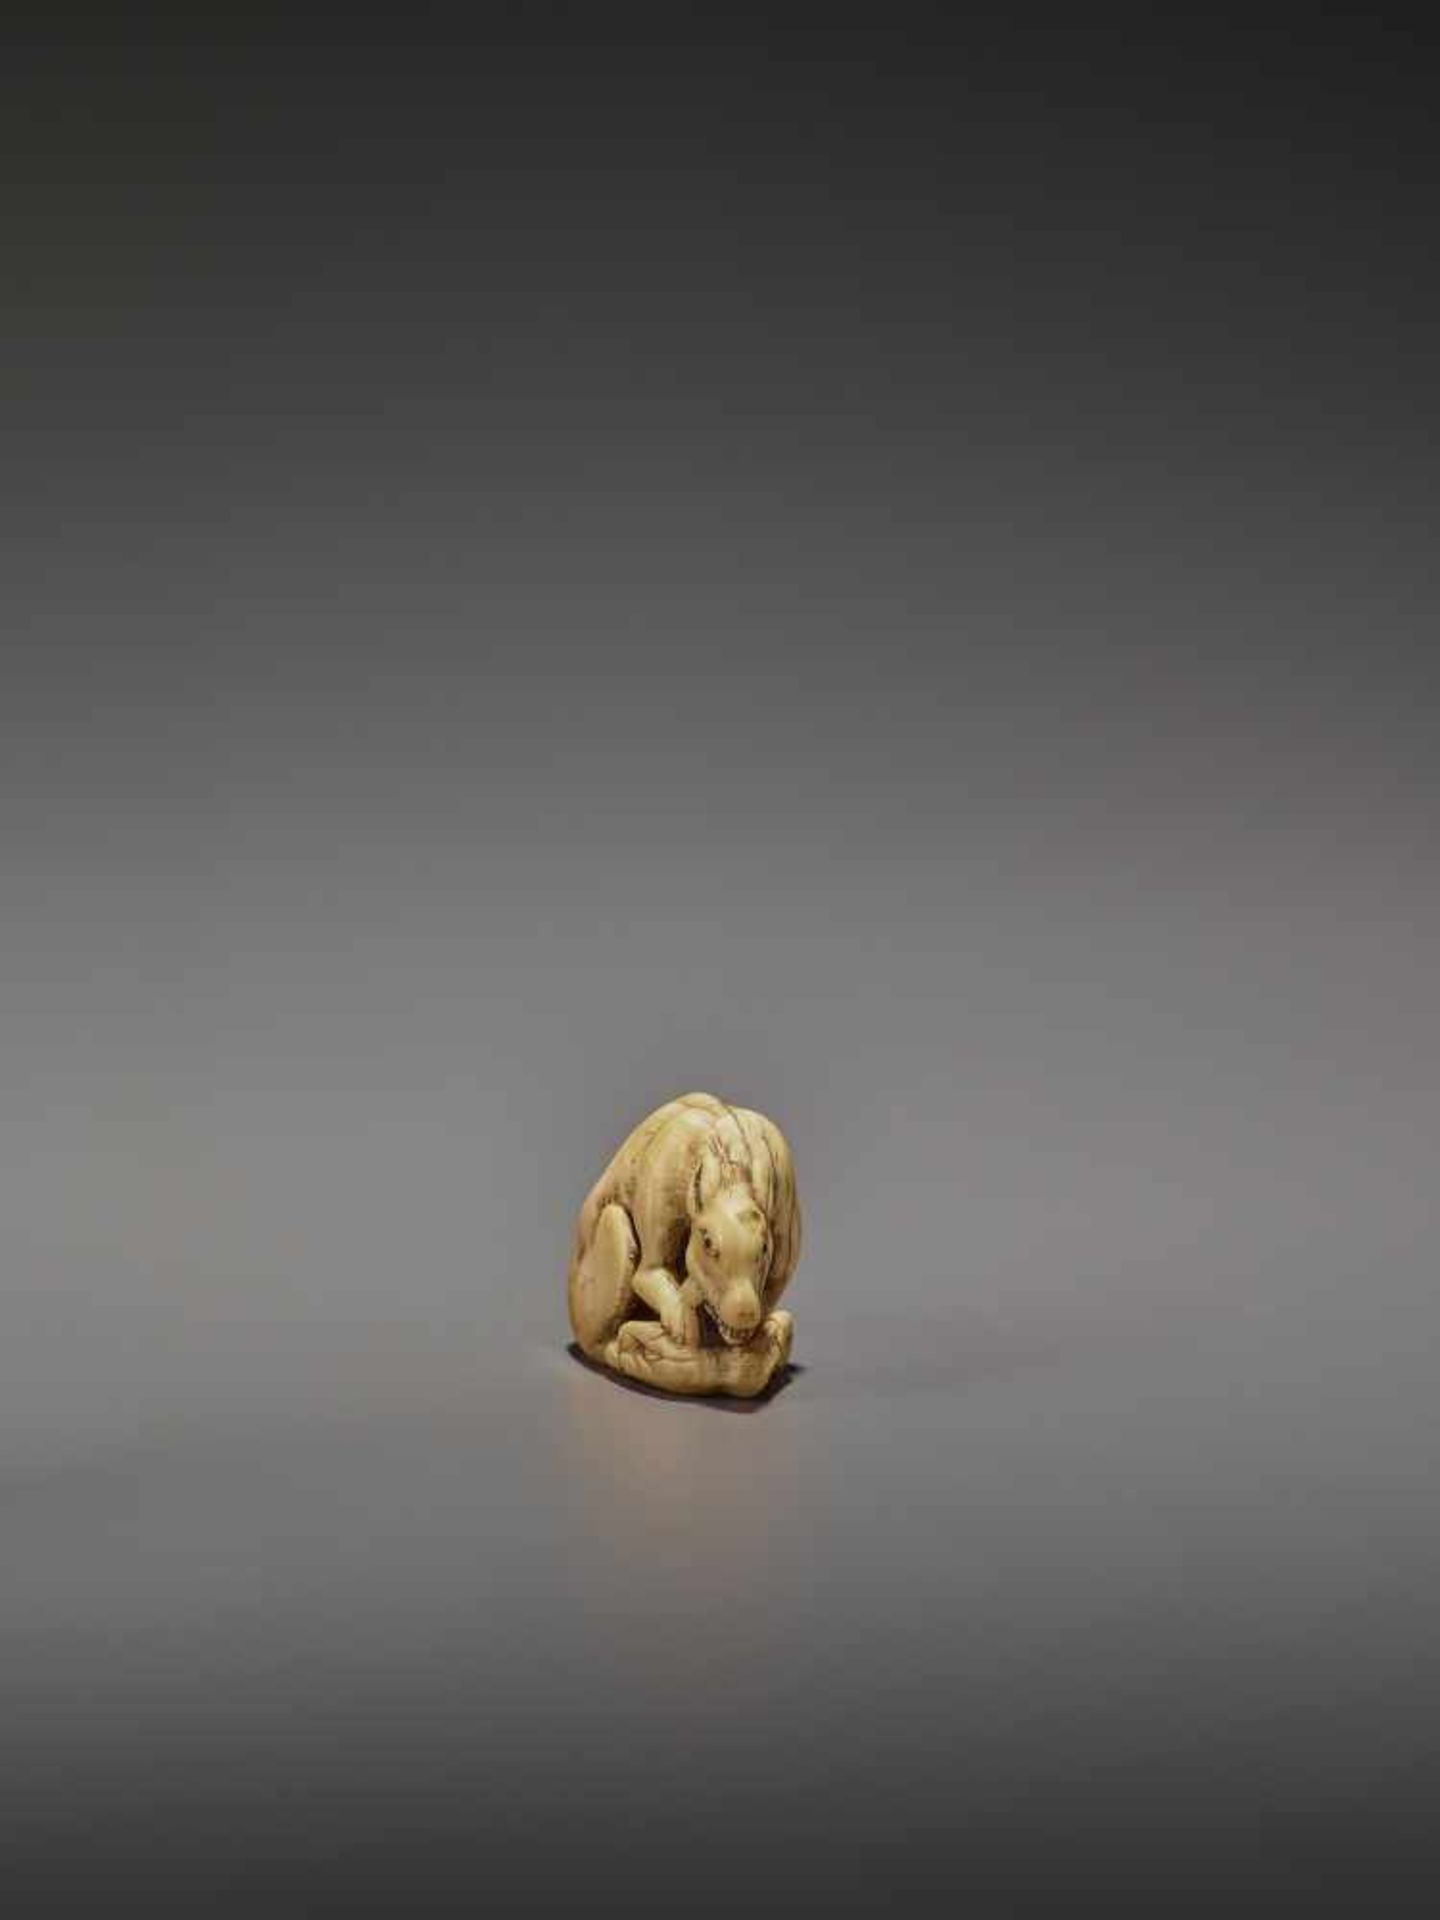 AN EARLY IVORY NETSUKE OF A WOLF WITH HAUNCH UnsignedJapan, Kyoto, 18th century, Edo period (1615- - Image 4 of 10